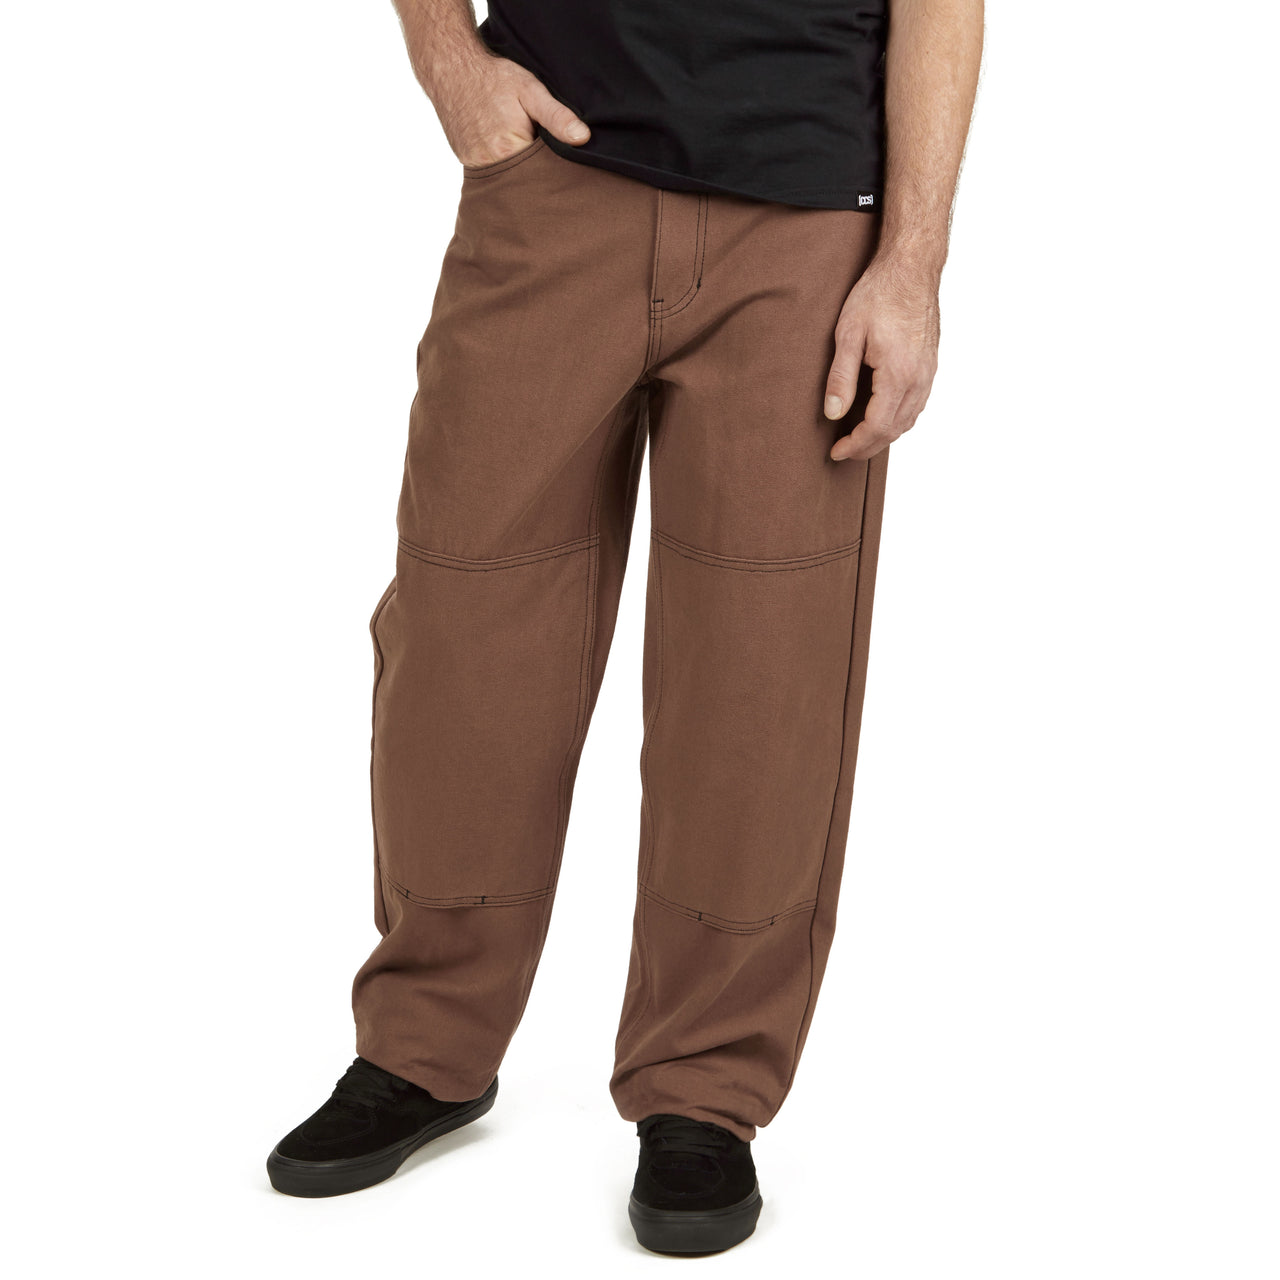 CCS Double Knee Original Relaxed Canvas Pants - Brown/Black image 1